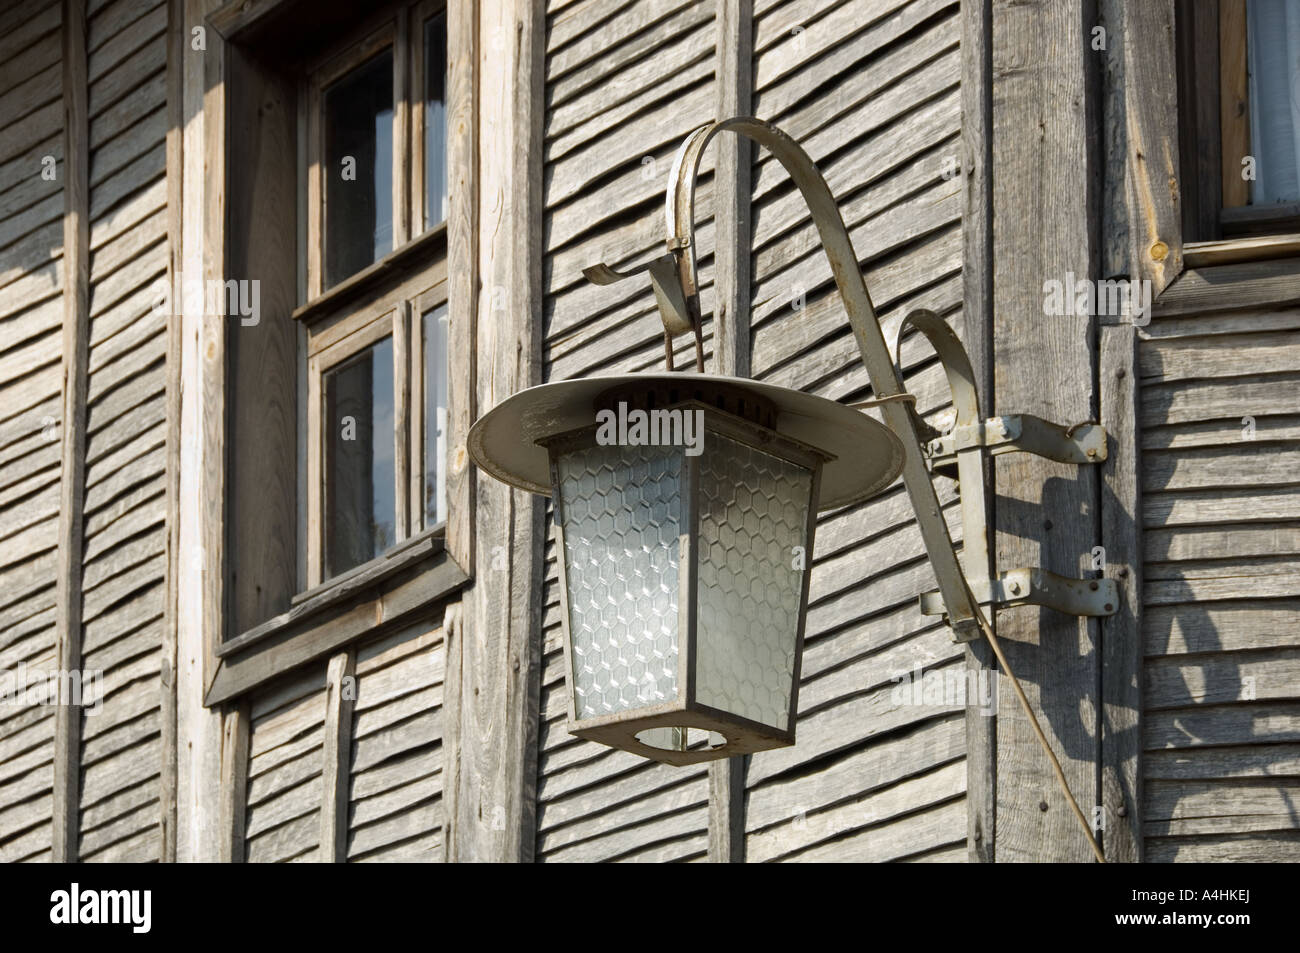 Lamp detail on Typical wooden house Old Nessebar Black sea coast Bulgaria East Europe Stock Photo